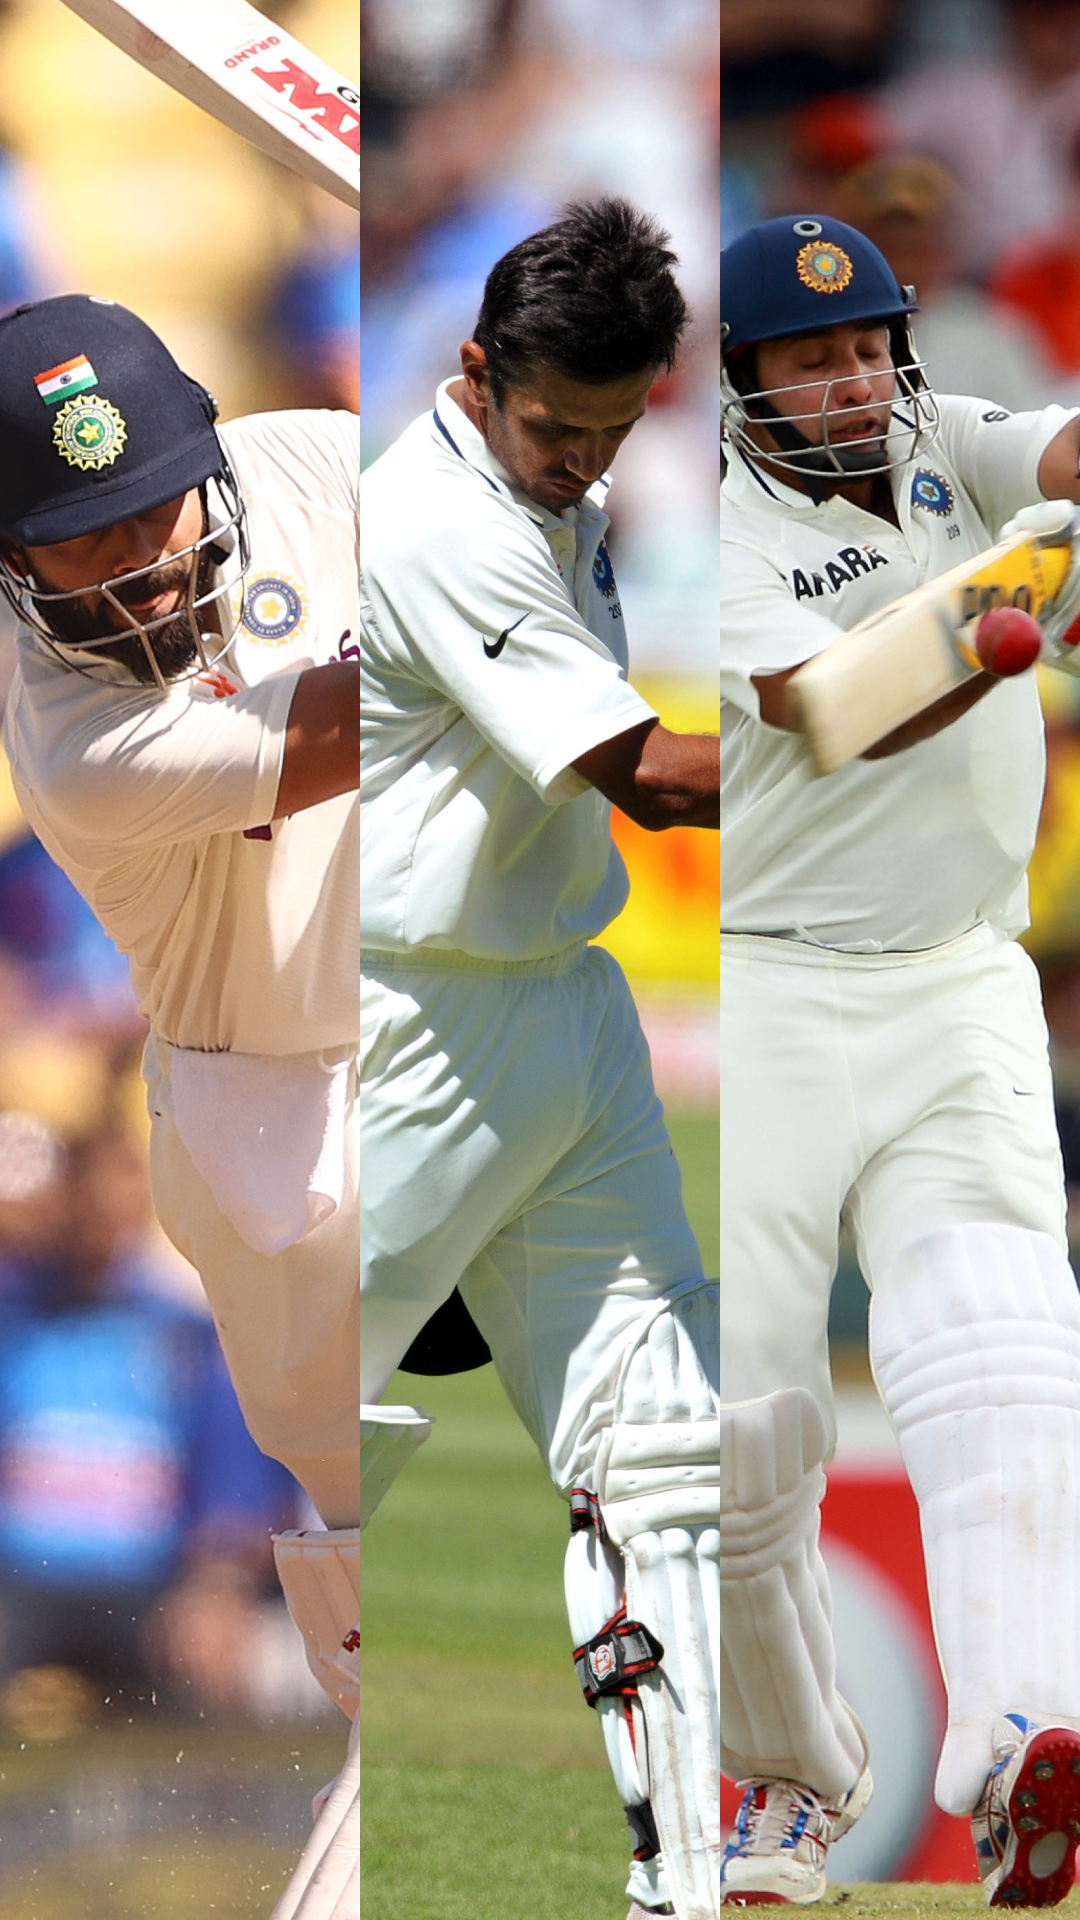 IND vs AUS 2nd Test: From Virat Kohli to Sachin Tendulkar, list of batters with highest individual scores in Test cricket